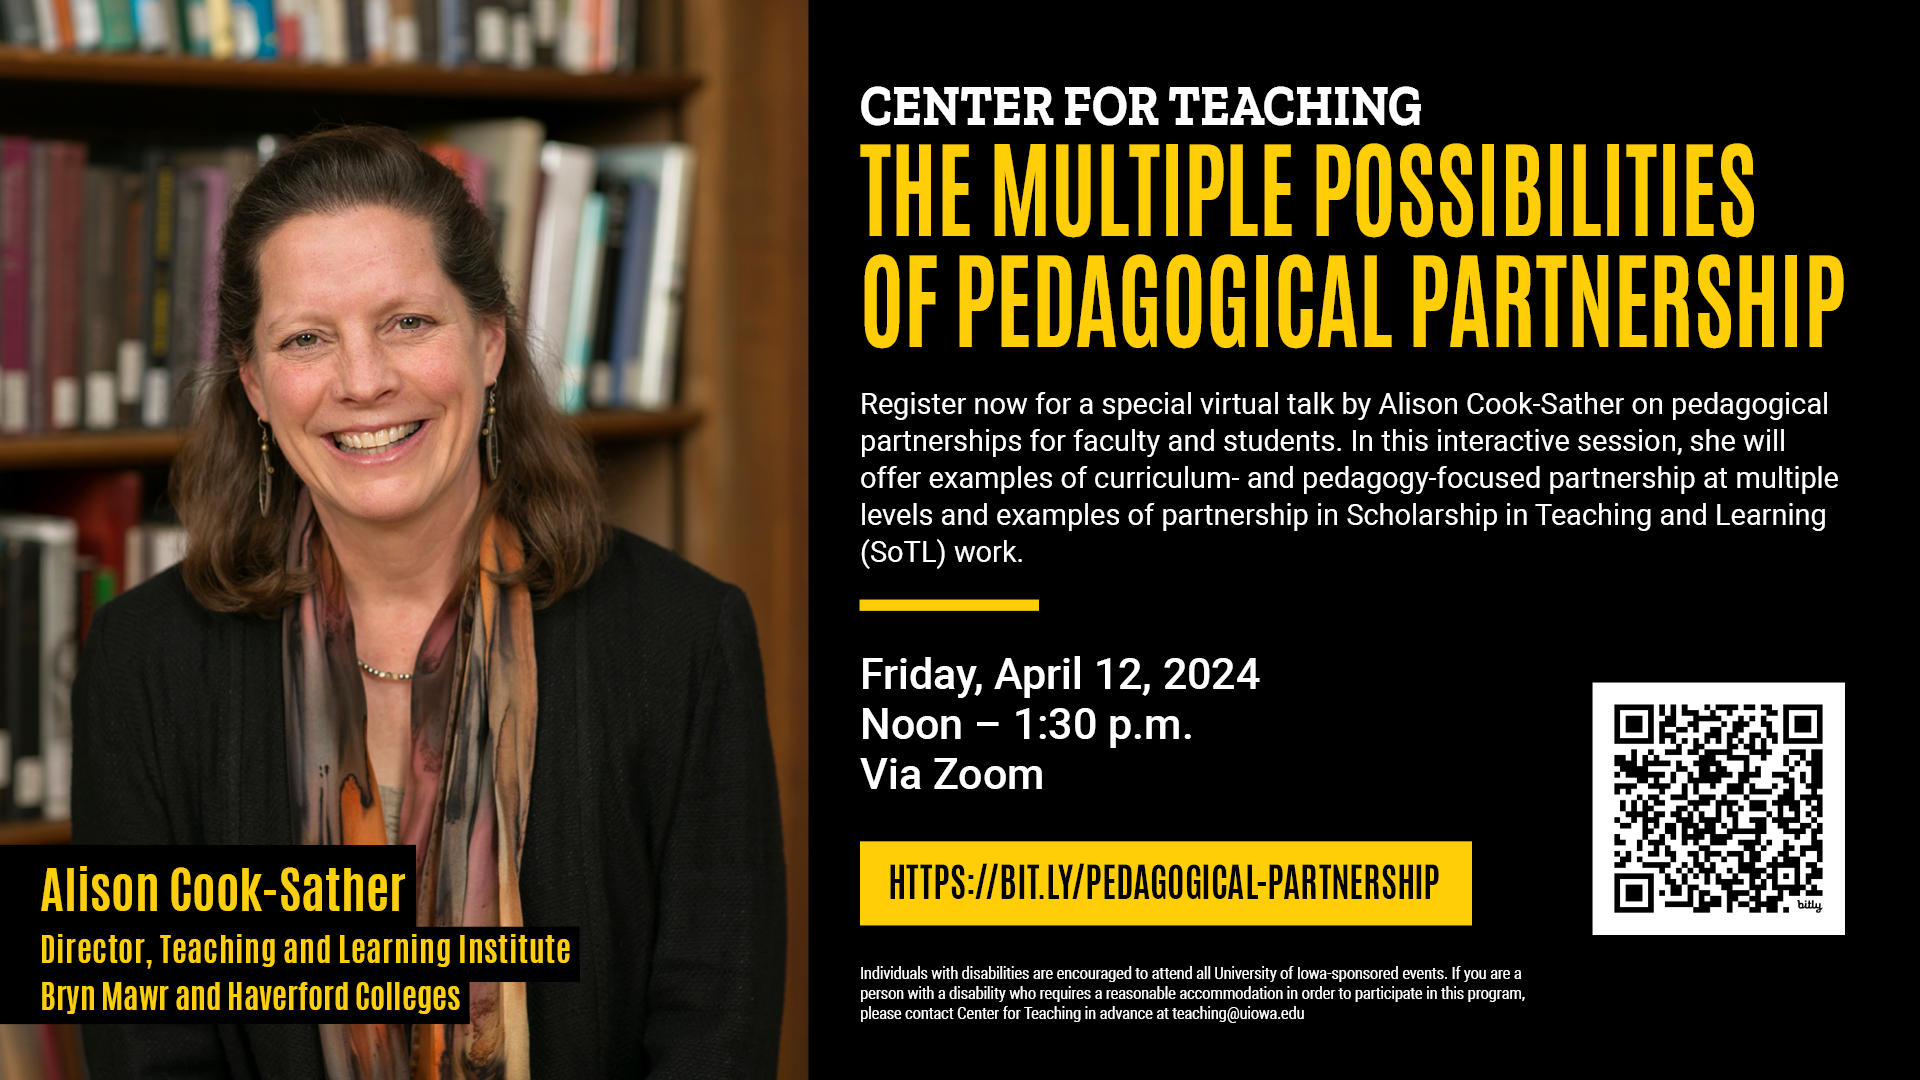 Pedagogical partnership event on Friday, April 12, at noon.